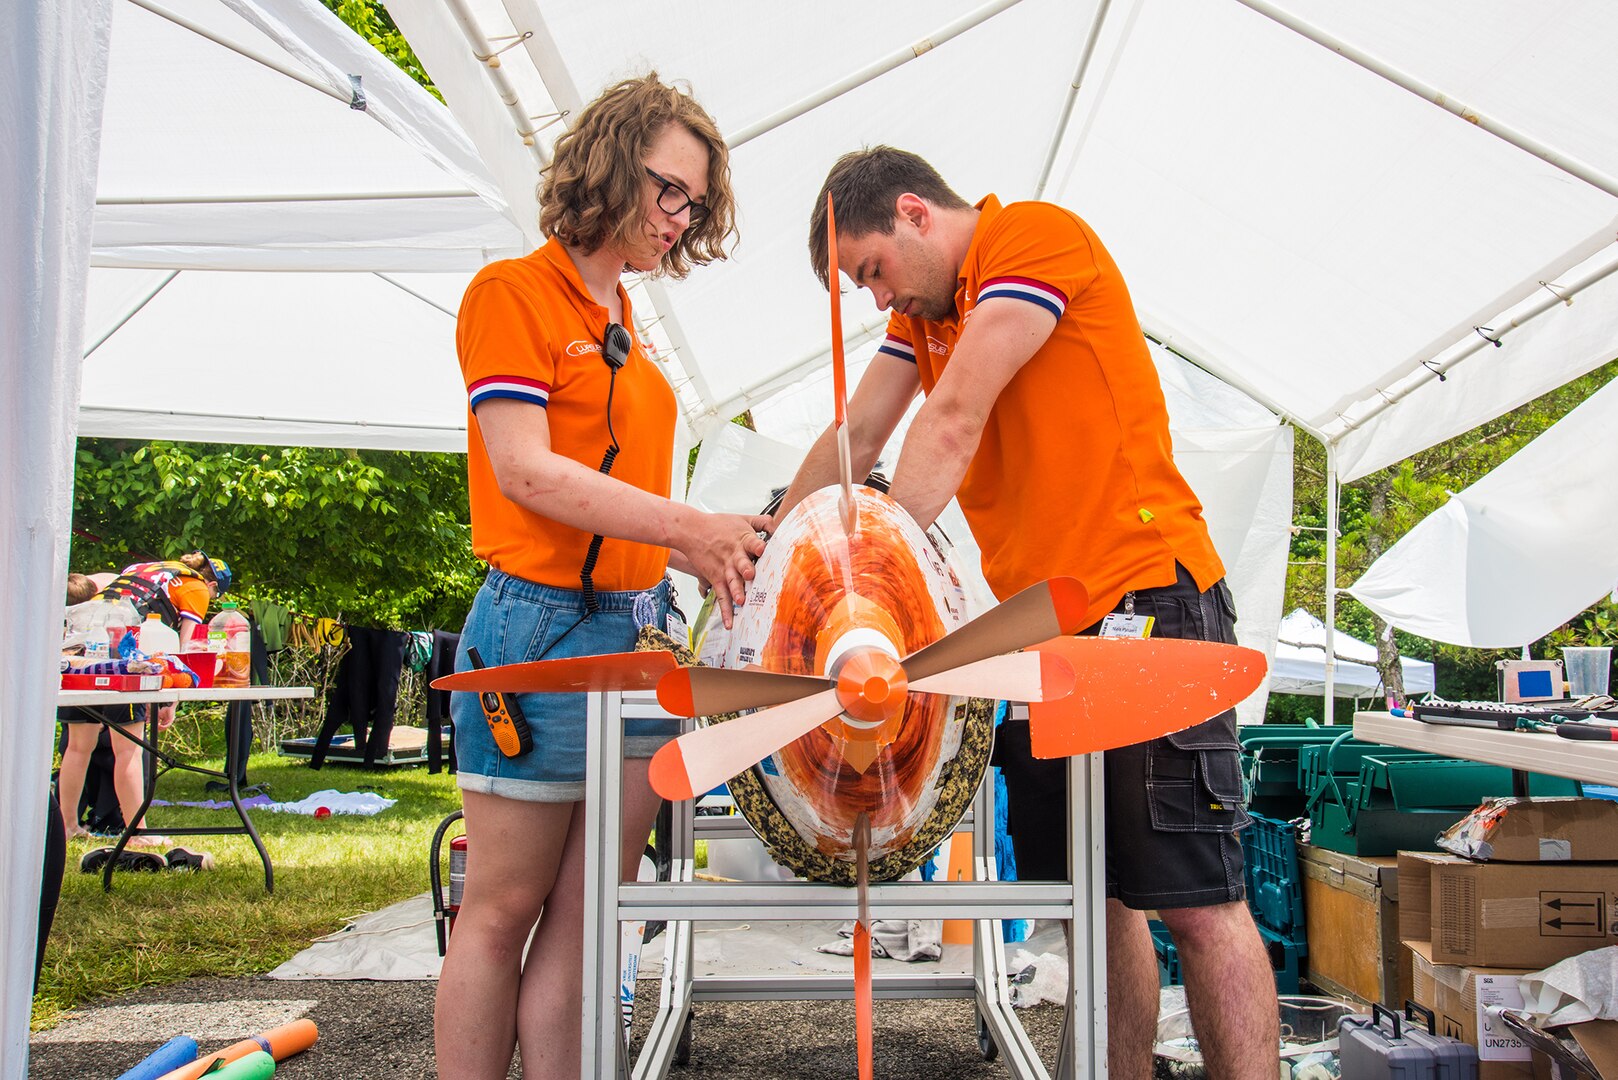 Wasub IX engineers Fien Pockele (left) and Niels Pynaert from the Netherlands evaluate their human-powered submarine before entering Naval Surface Warfare Center, Carderock Division’s David Taylor Model Basin for a wet inspection test in West Bethesda, Md., on June 25, 2019.